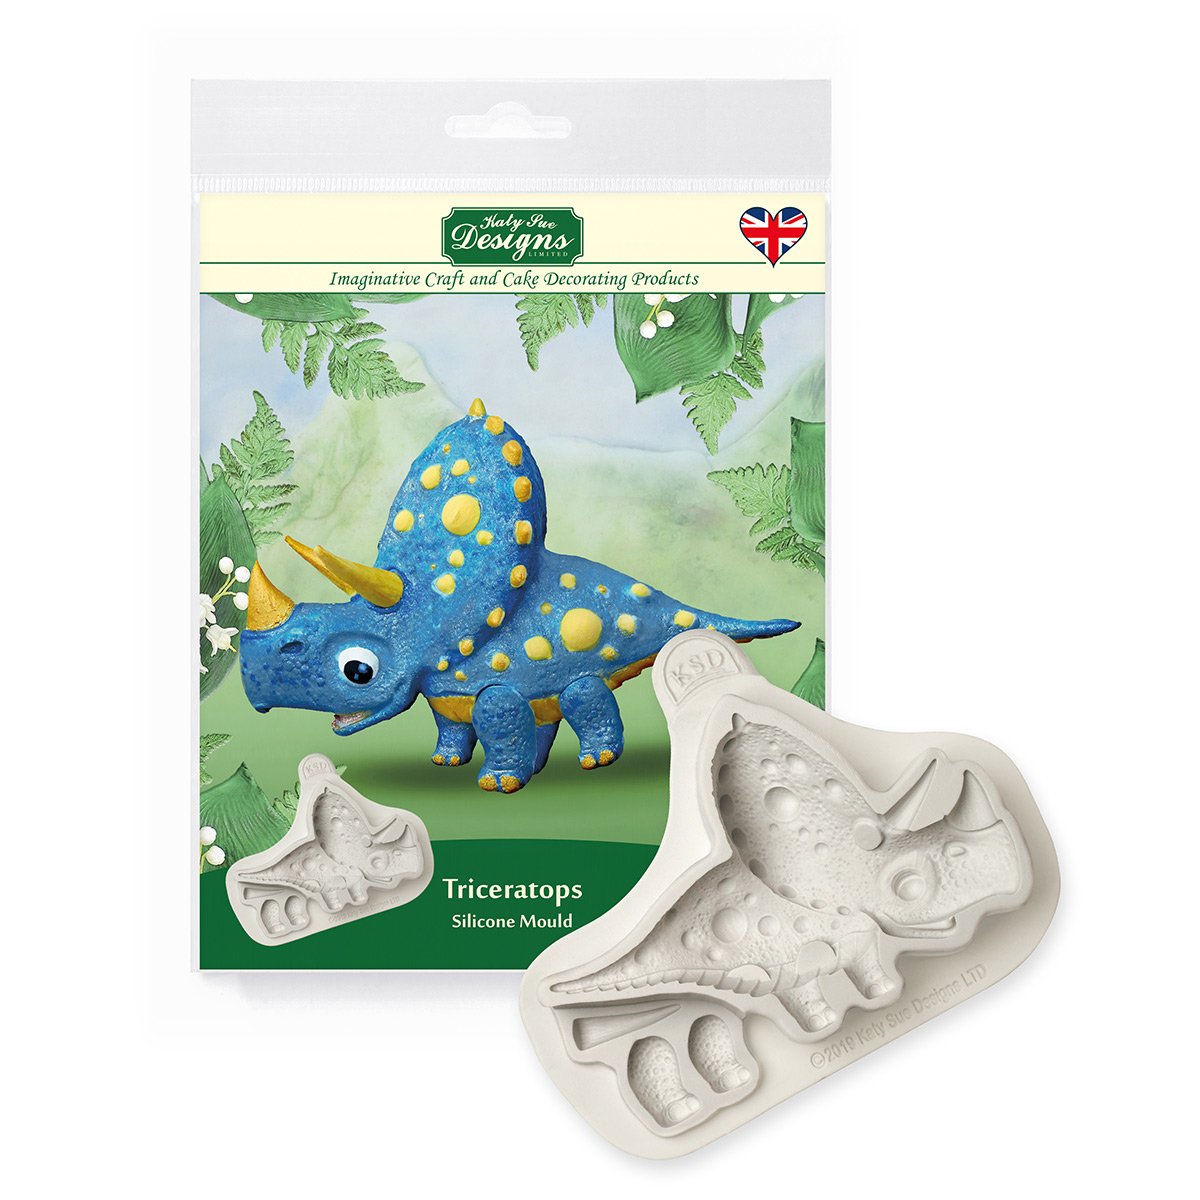 Triceratops Silicone Mould - Katy Sue Mould